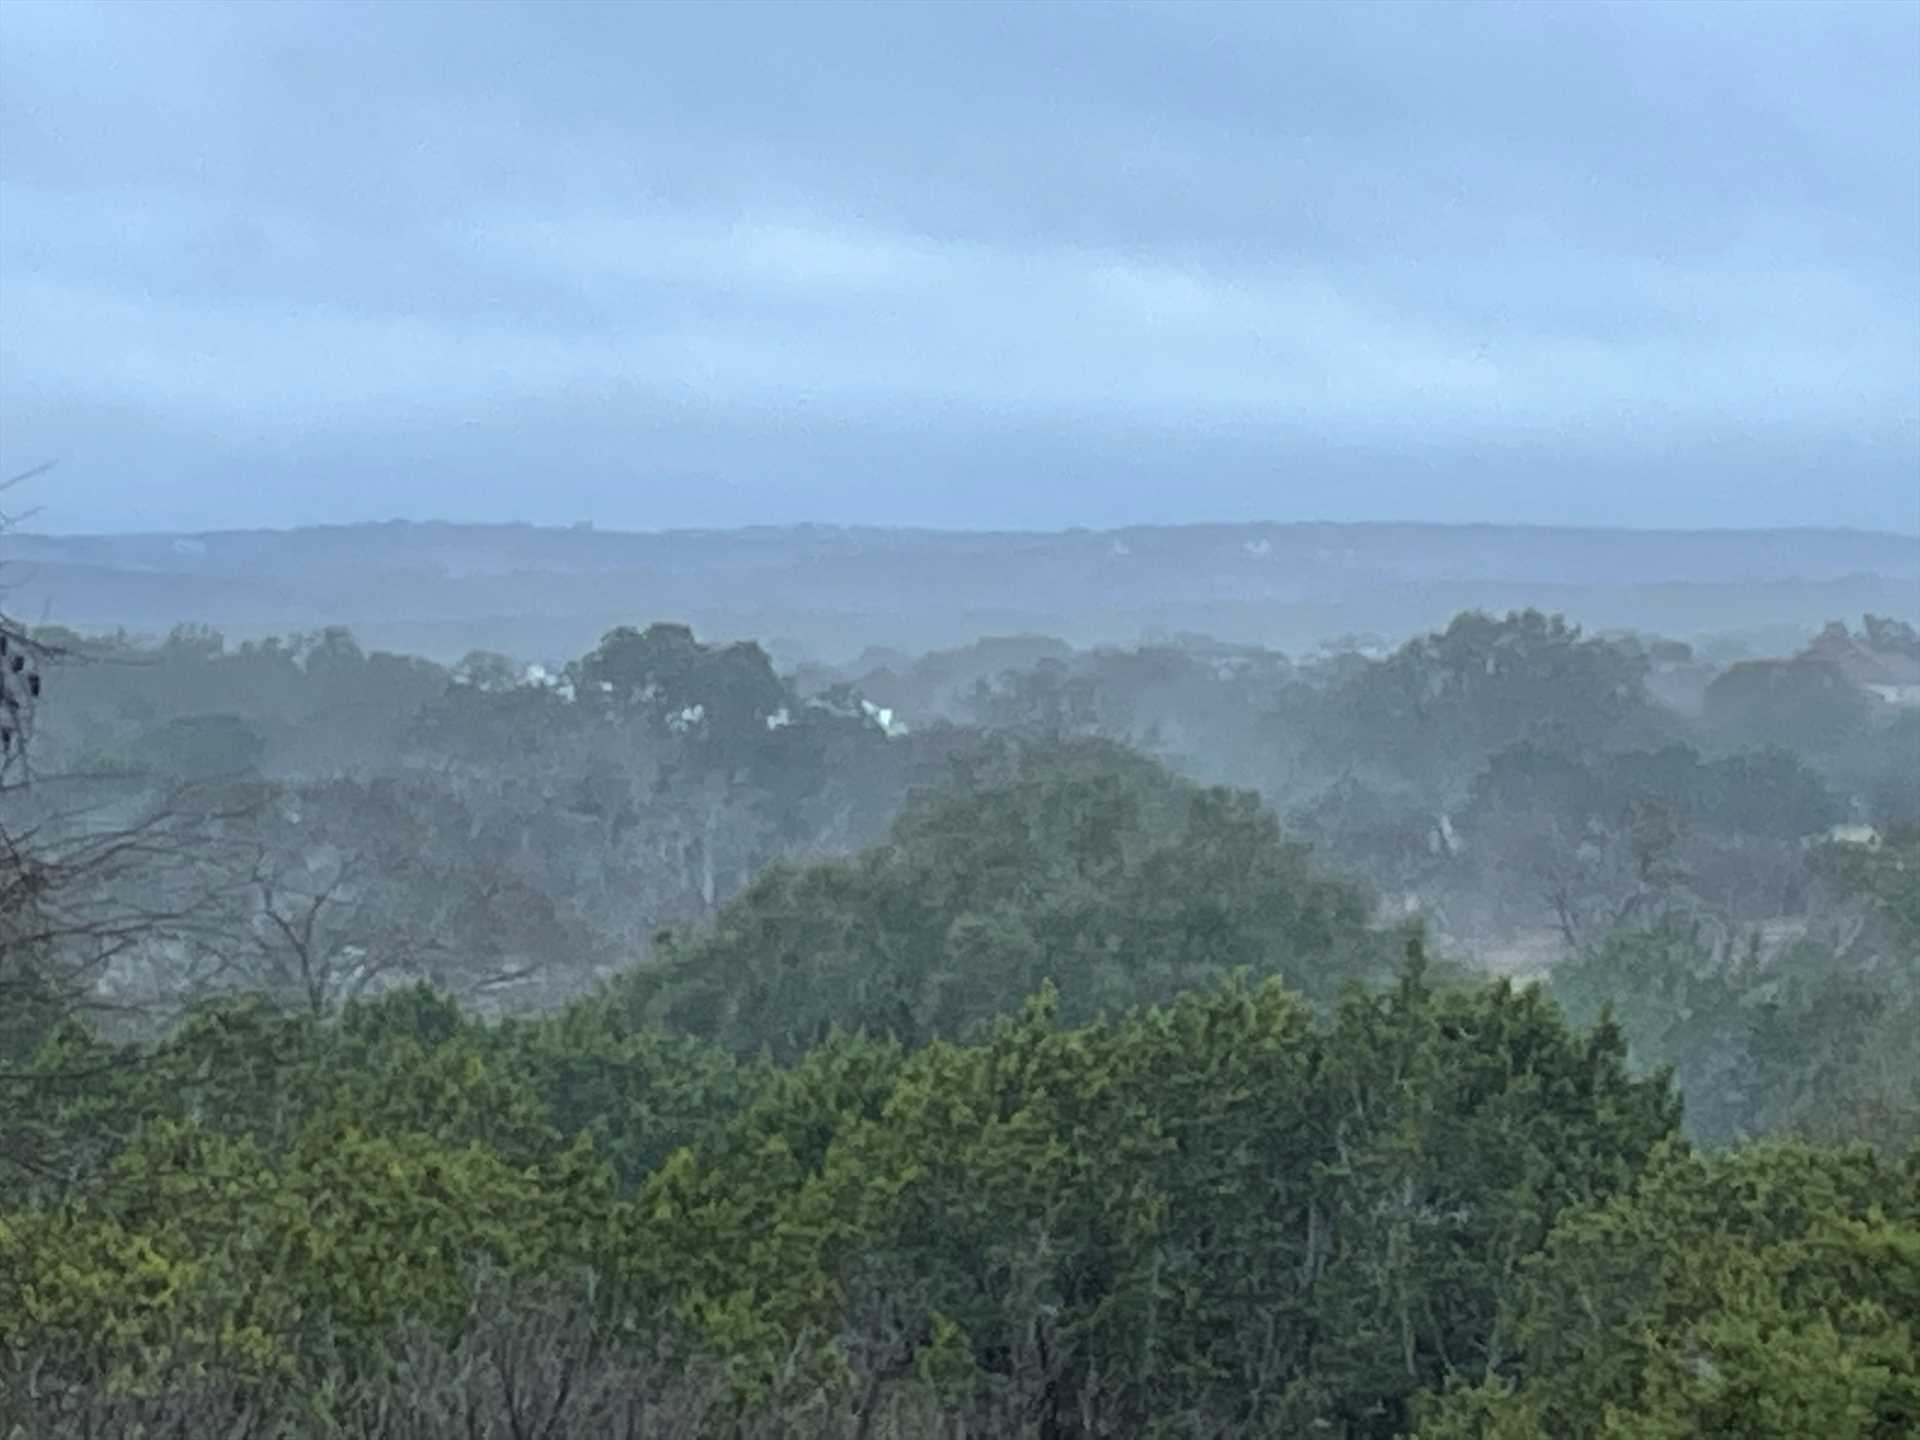                                                 Misty treetop views of the rolling Hill Country will greet you every day at the Boerne Mountain Retreat!